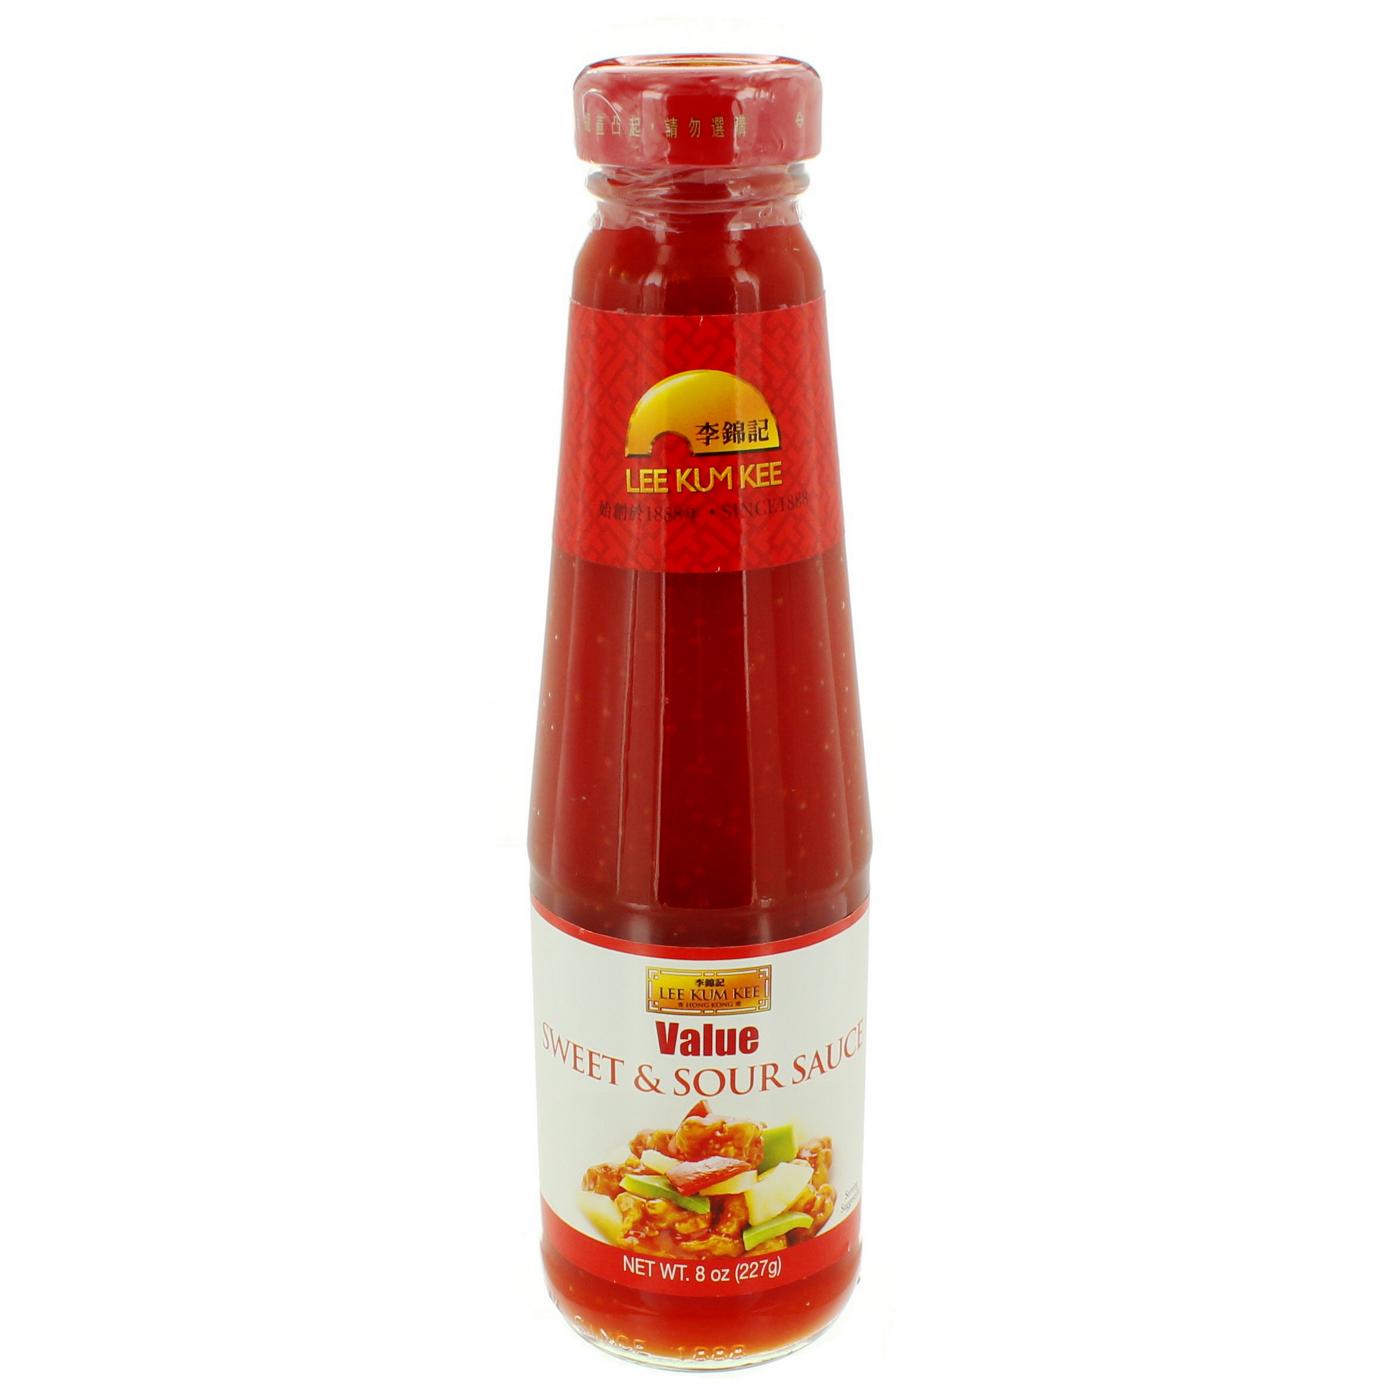 Lee Kum Kee Value Sweet and Sour Sauce; image 1 of 2